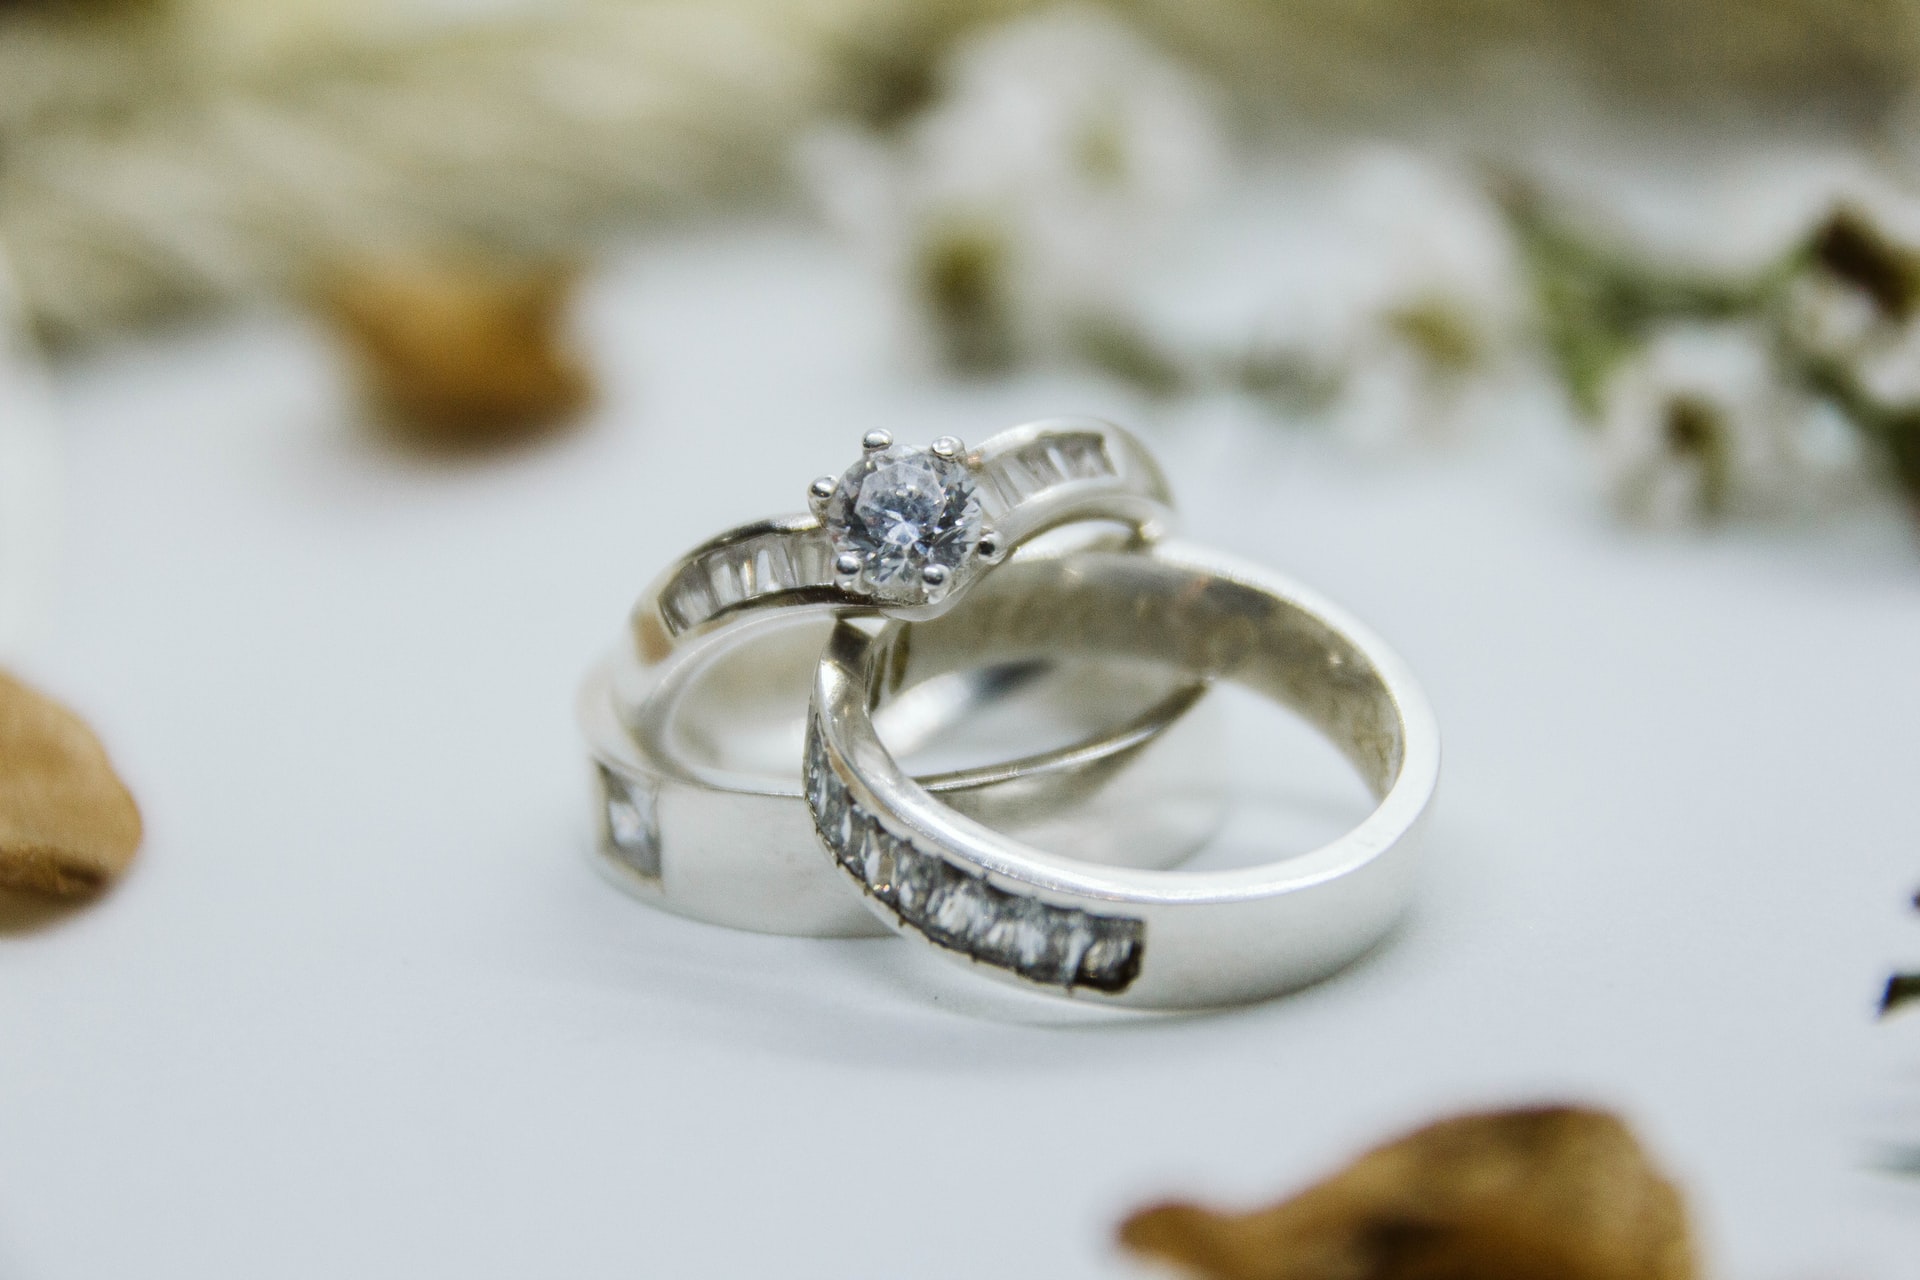 Personalise your engagement ring by engraving it